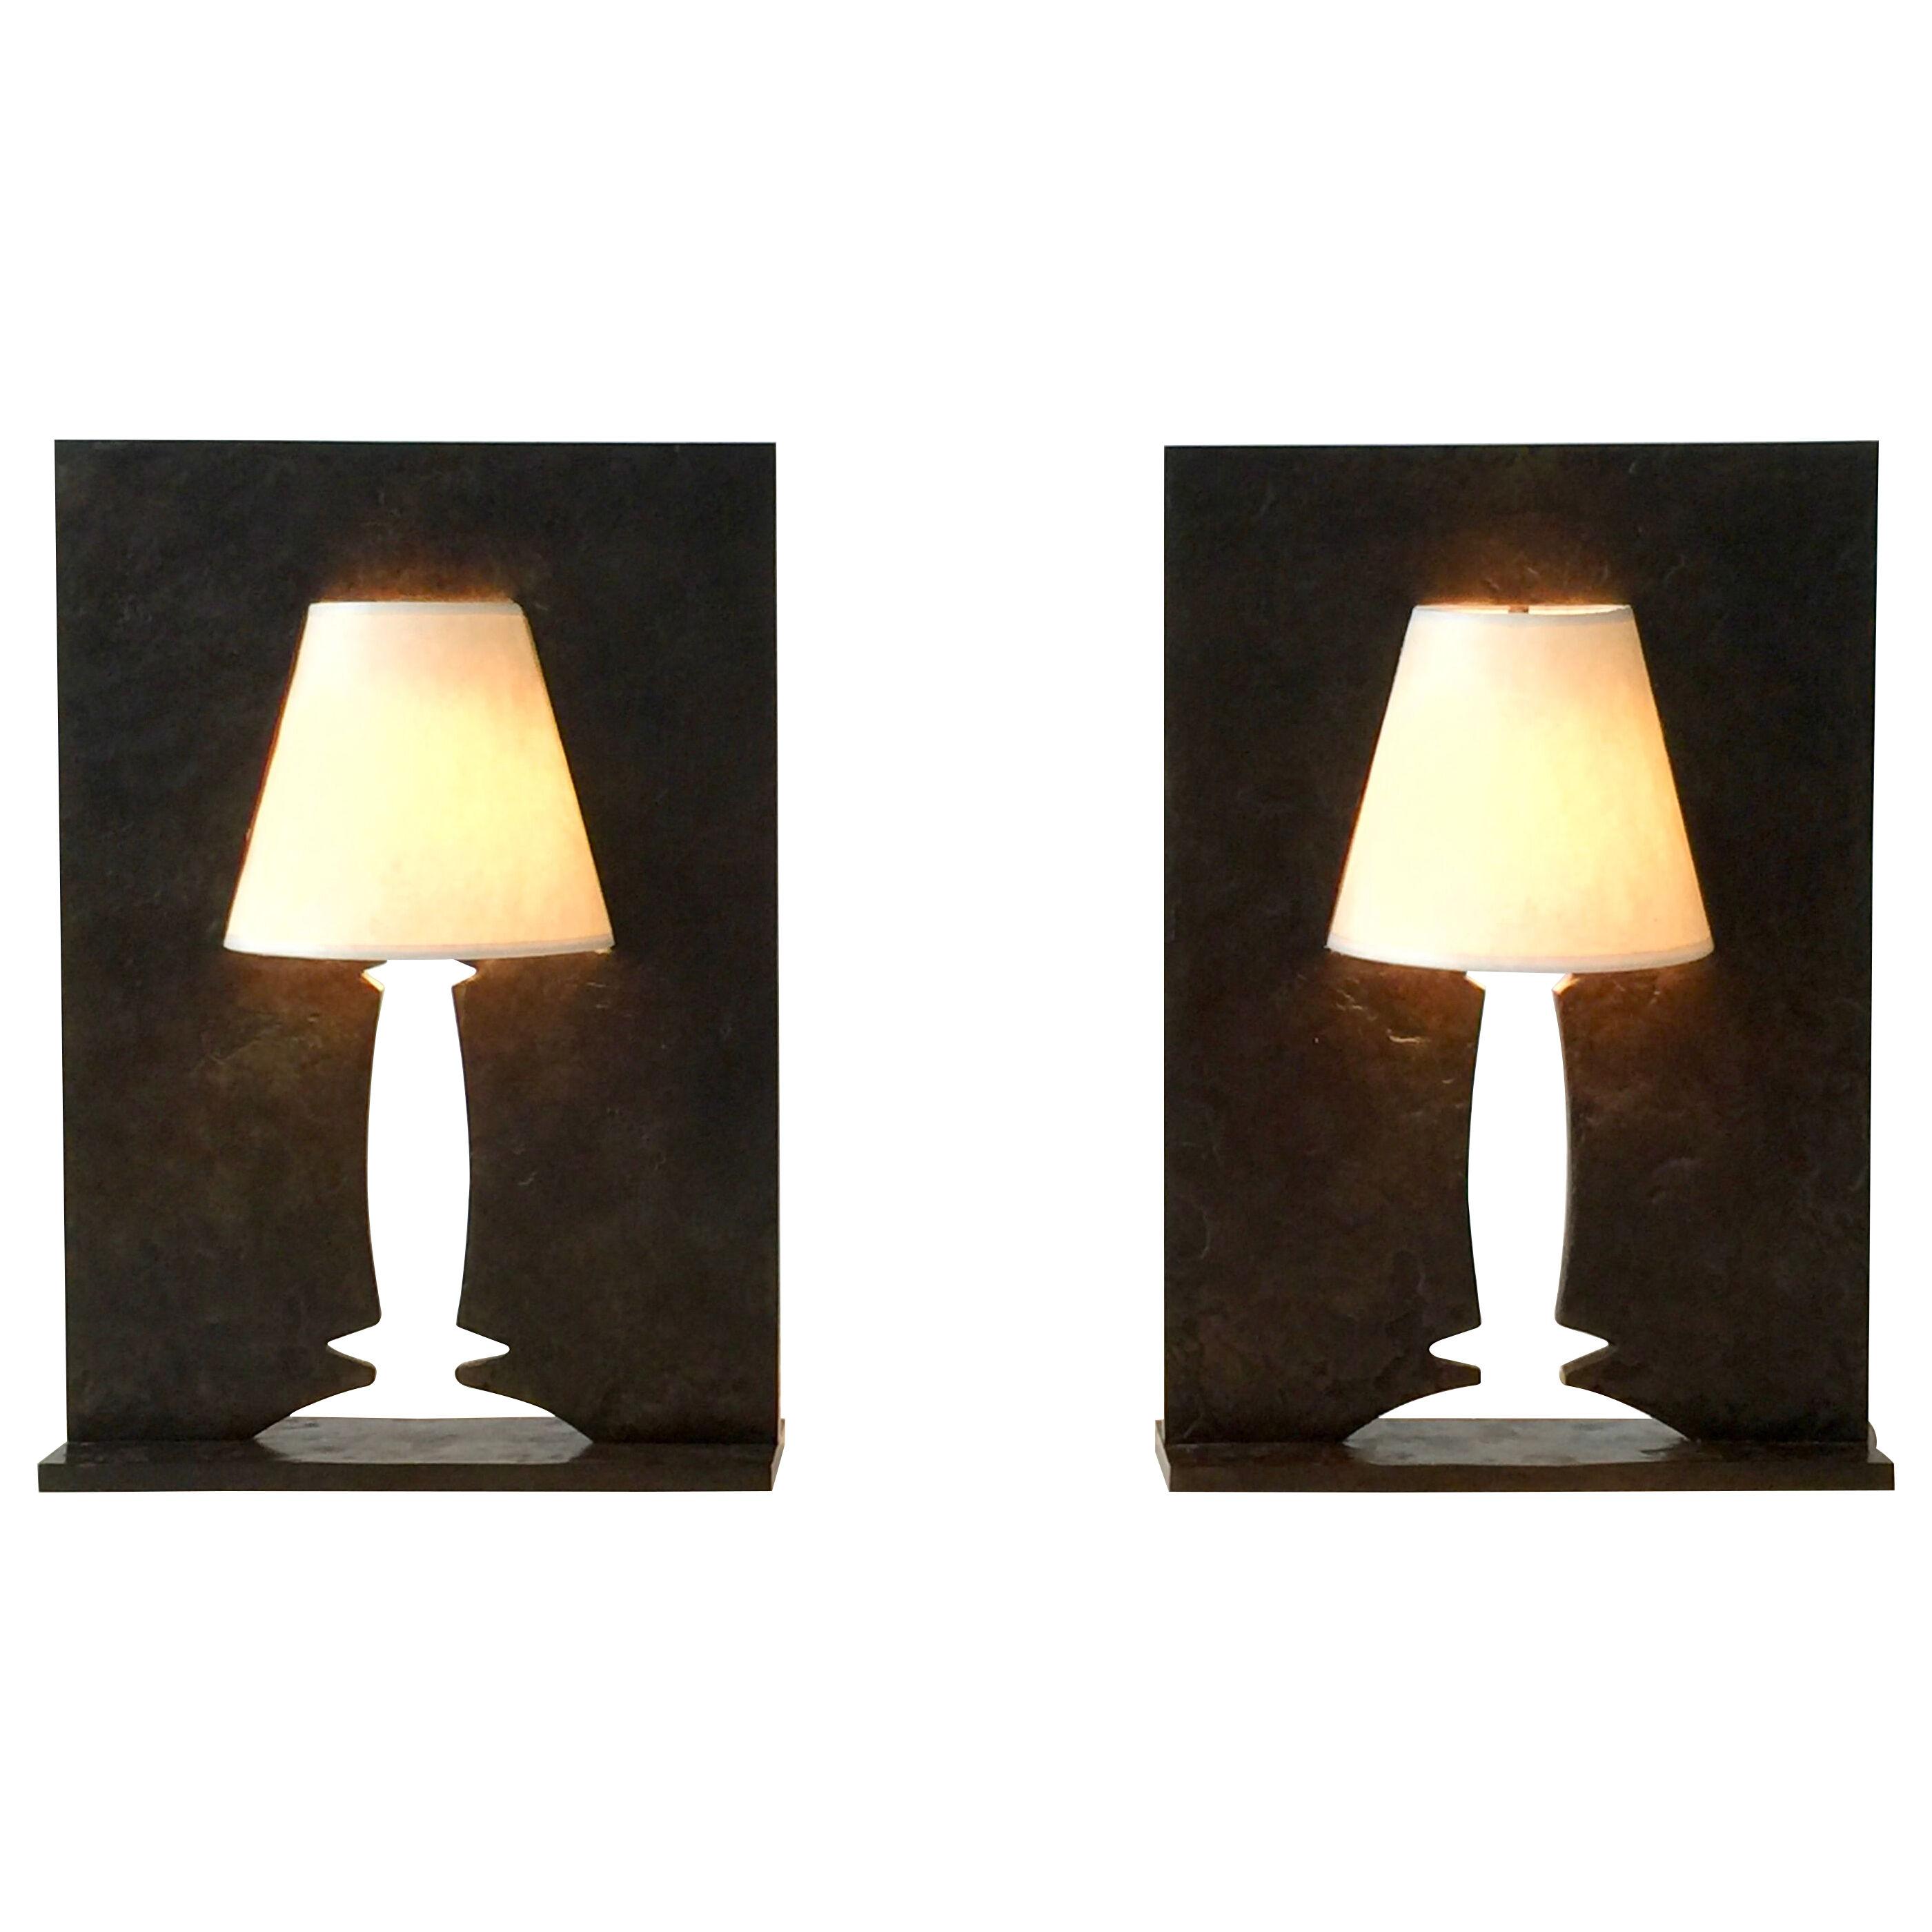 Pair of 'Allusion' Table Lights by Hubert Le Gall, 1999